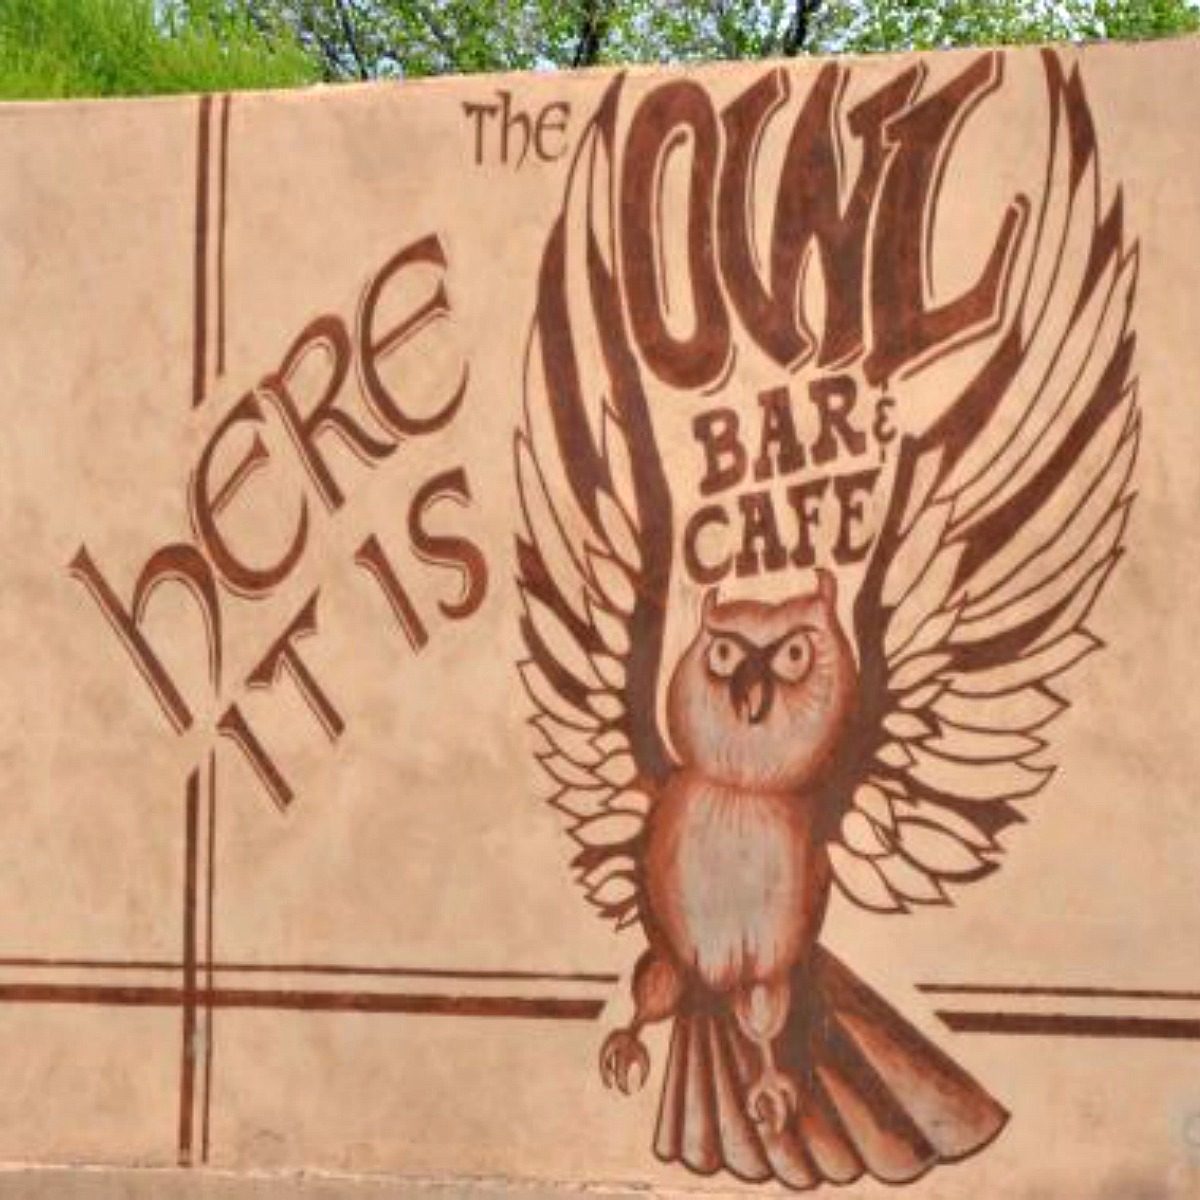 Sign for the Owl Bar and Cafe